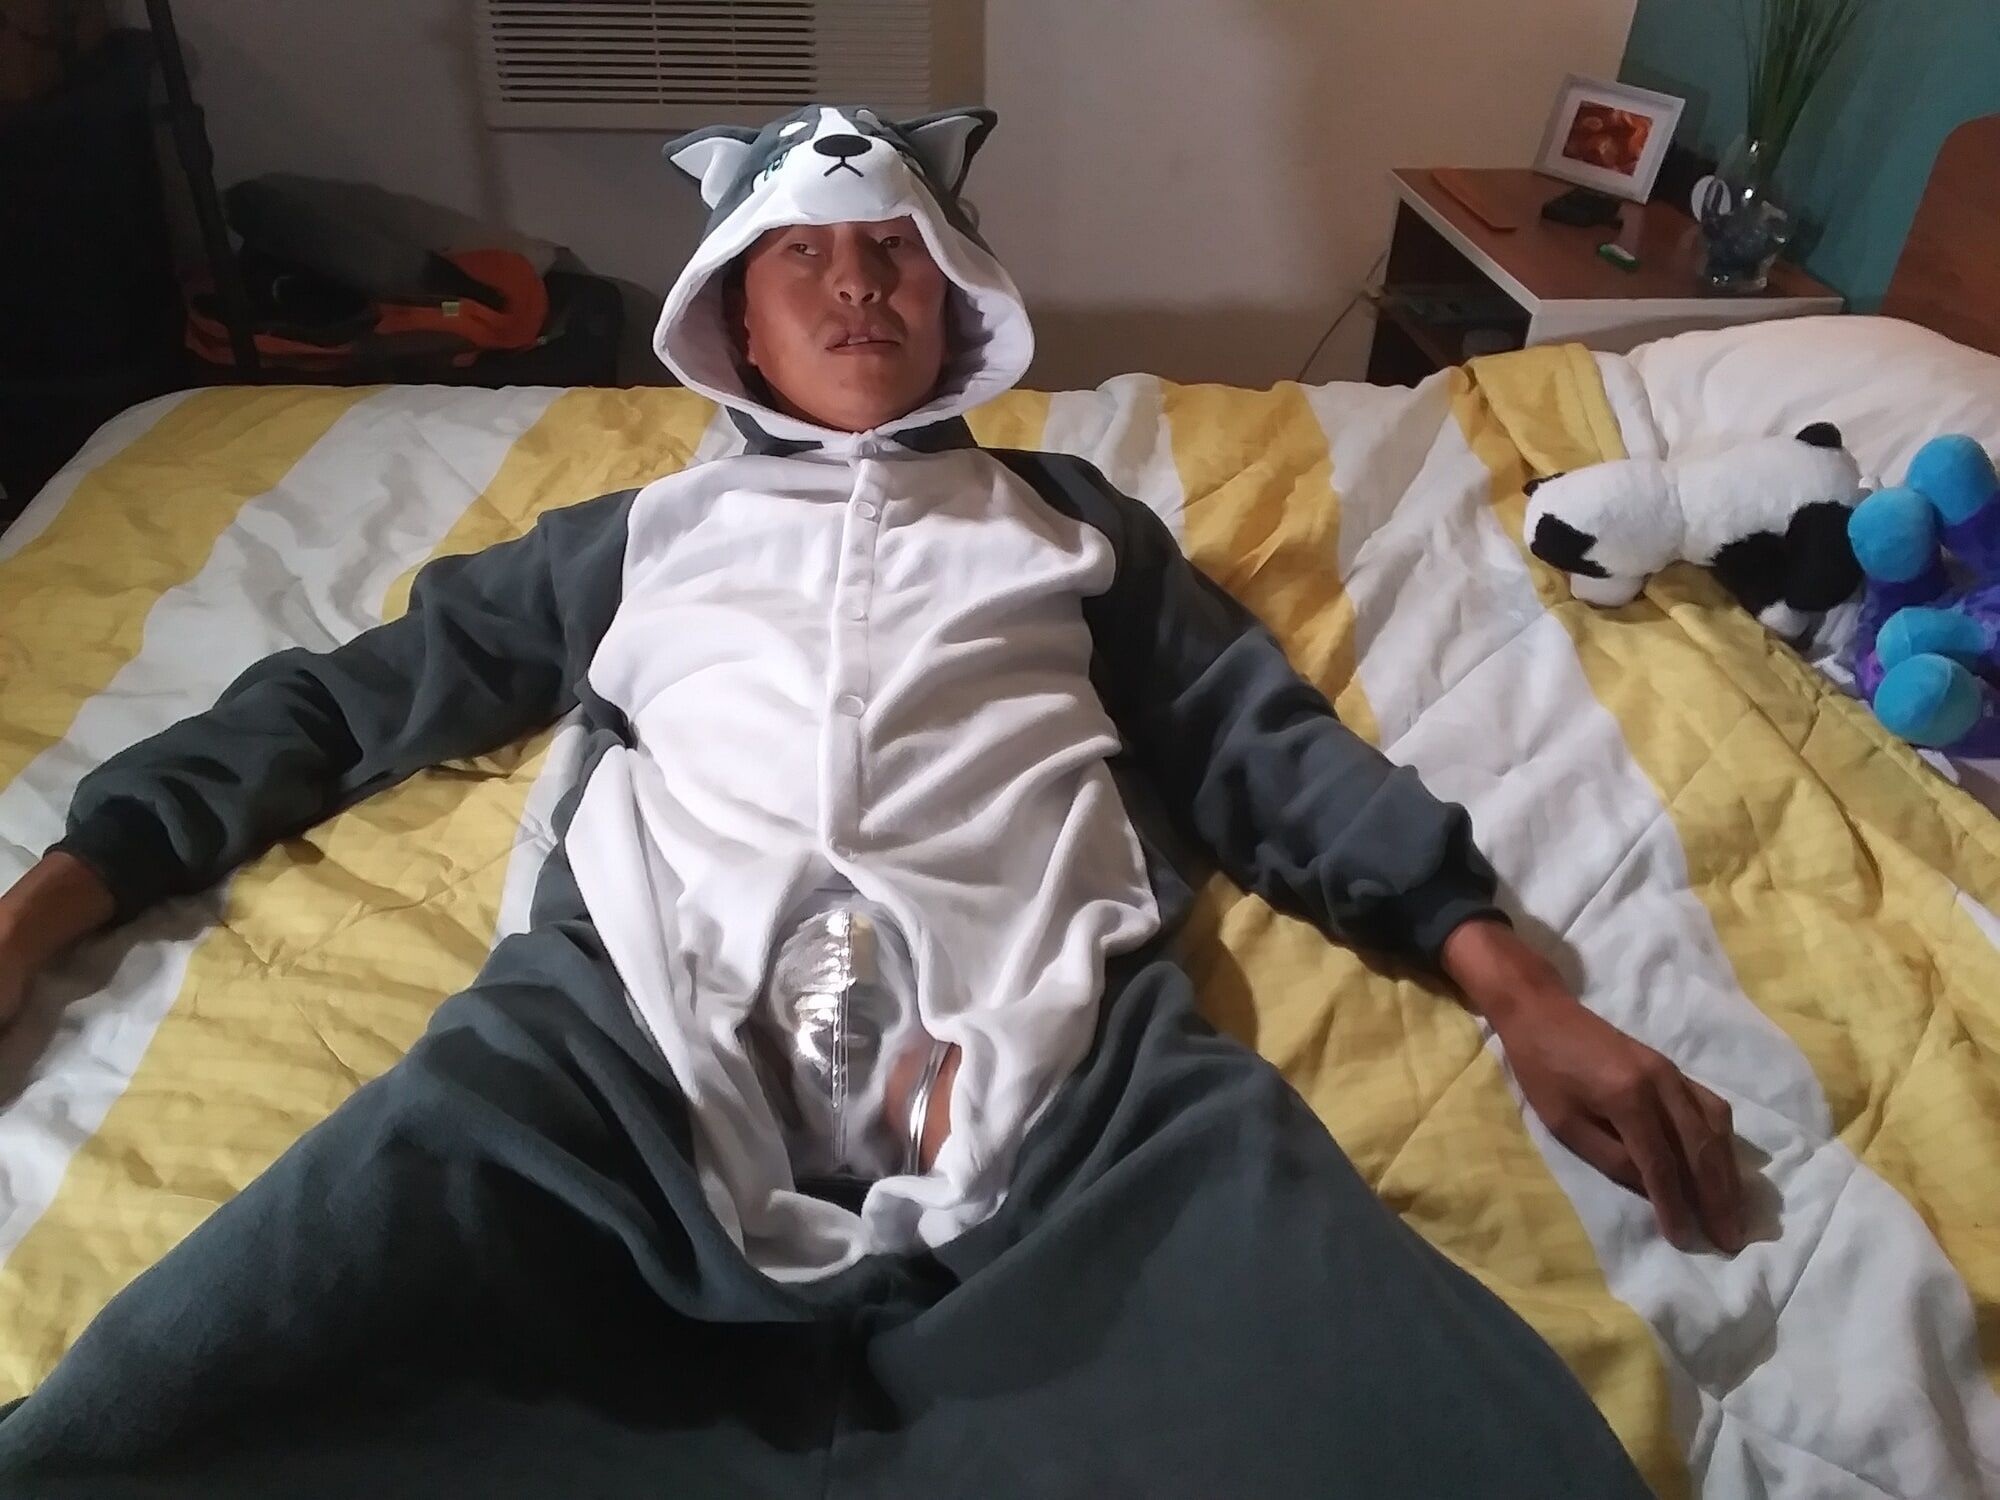 Hot asian boy wearing furry onesies and shiny undies #36